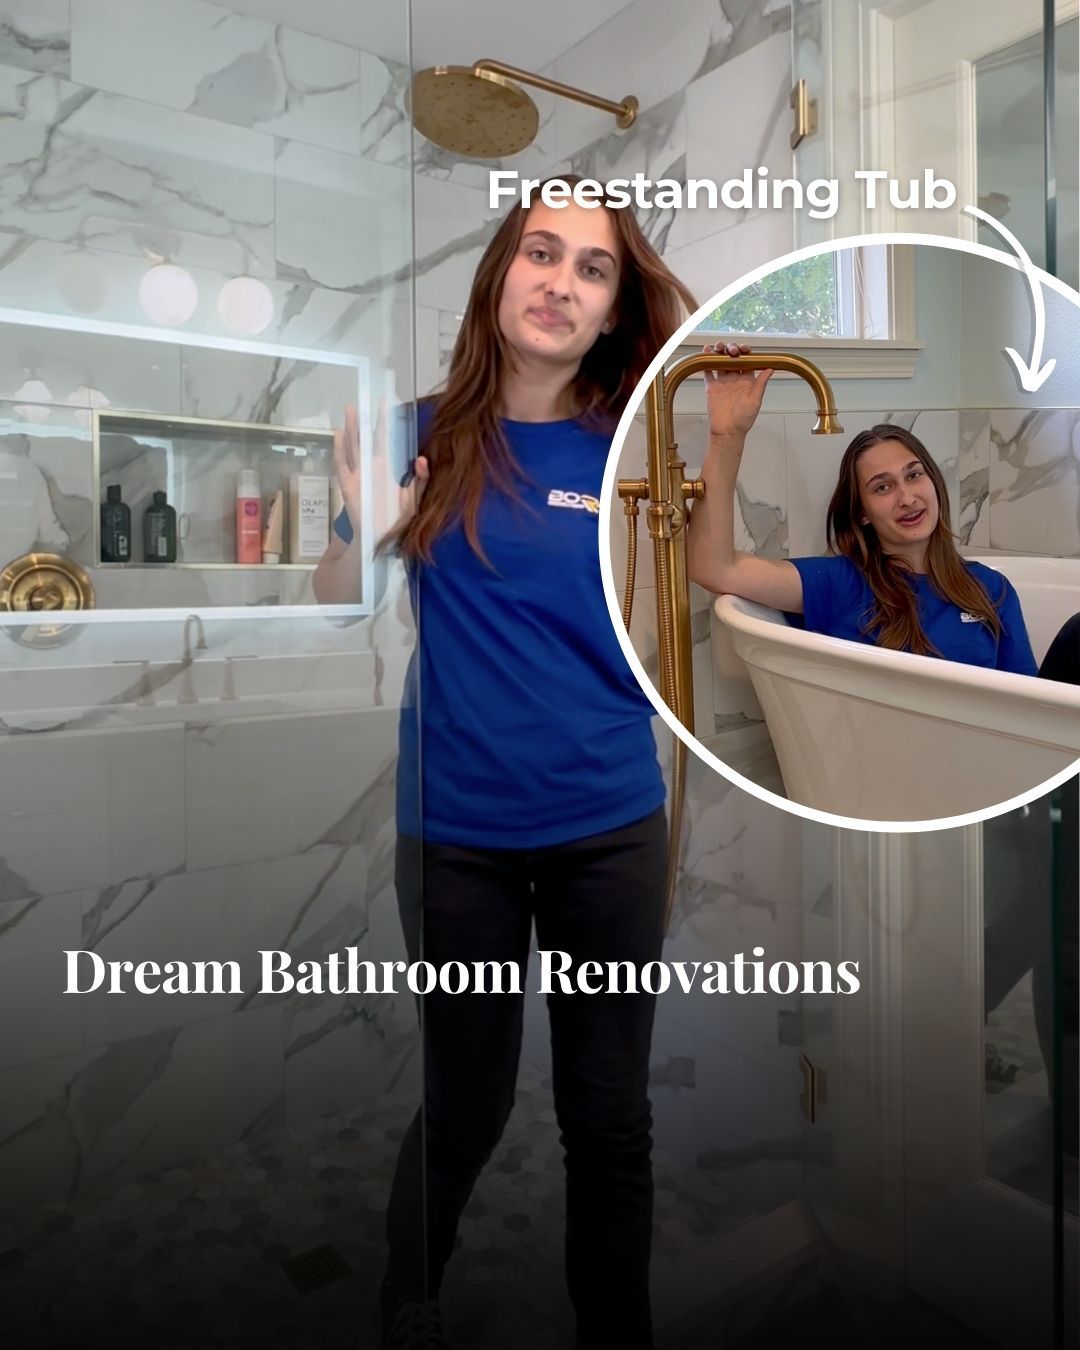 Which Bora Co Renovation Steals Your Heart: Freestanding Tub, Beautiful Shower, or Bathroom Sink?